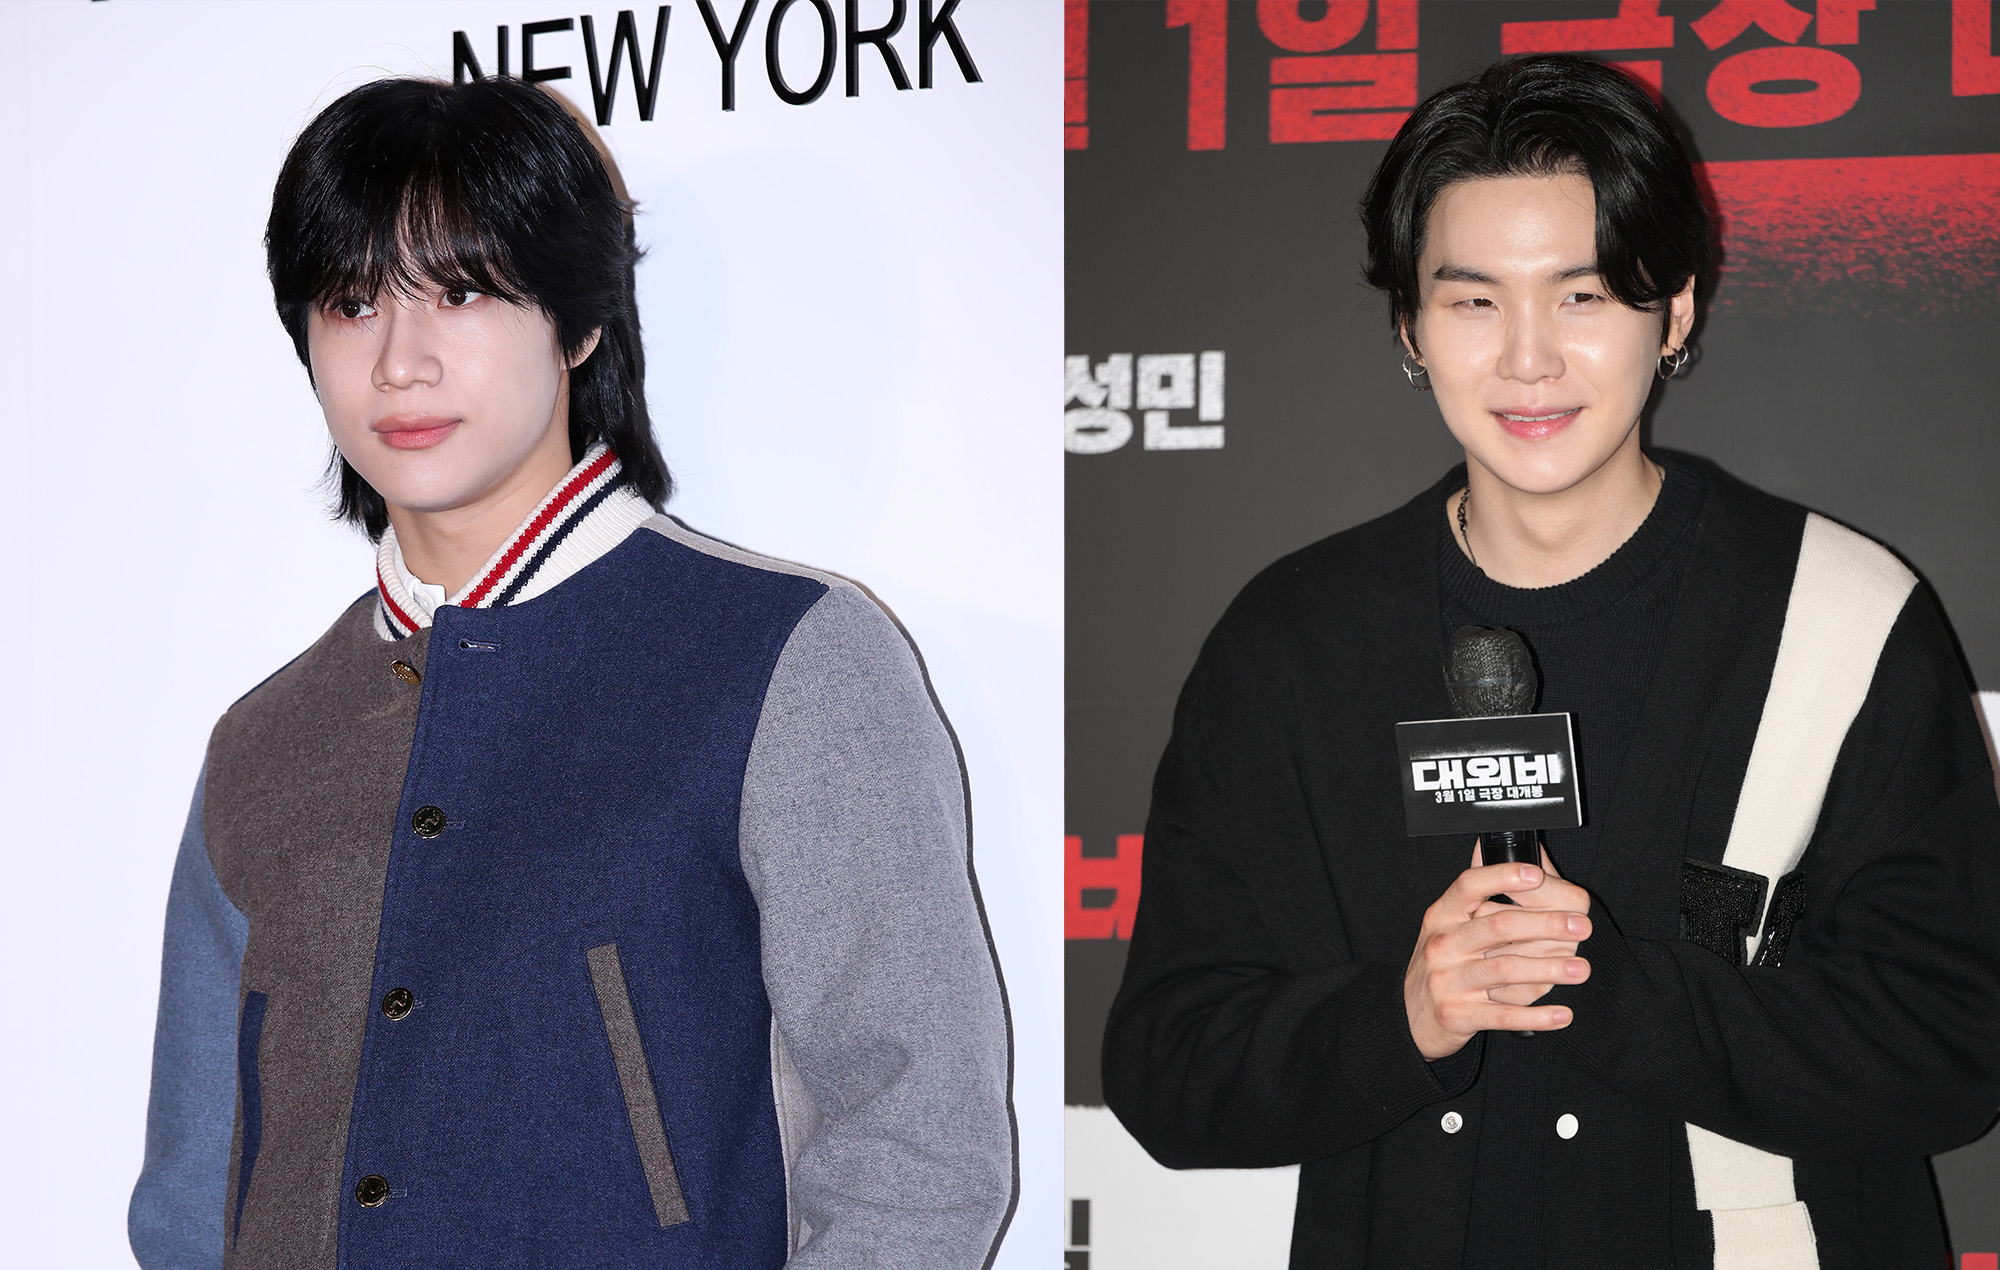 SHINee’s Taemin to guest star on BTS Suga’s talk show ‘Suchwita’